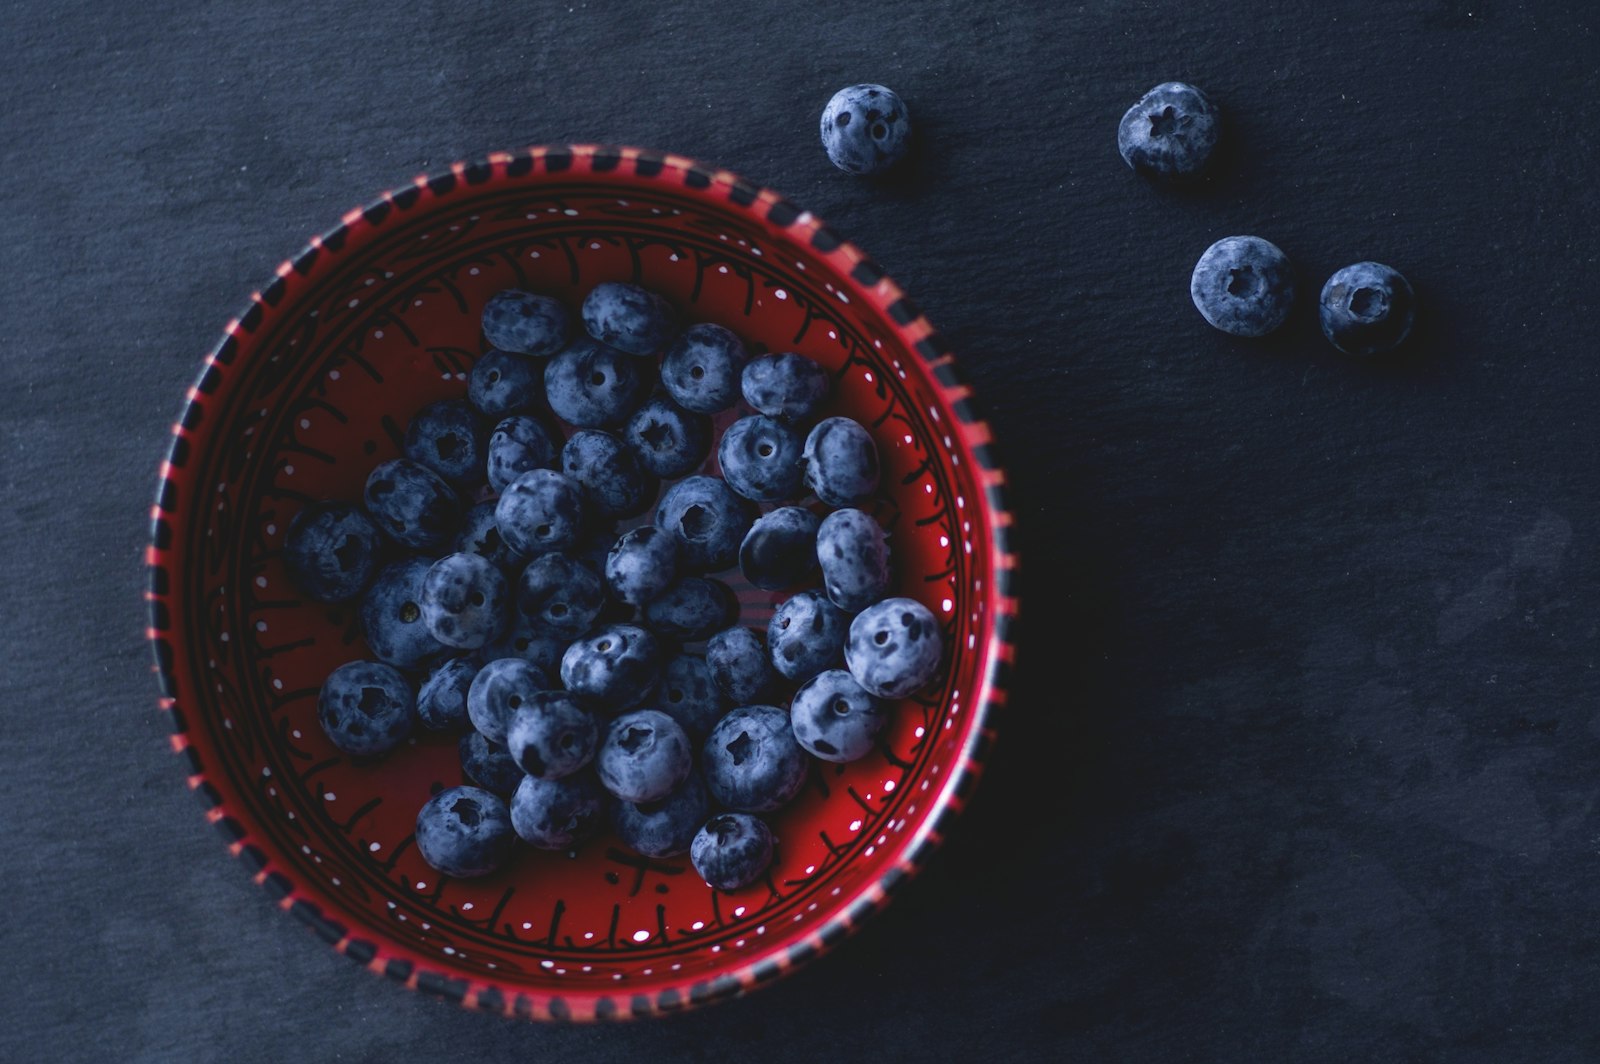 Pentax K-3 II sample photo. Blueberries in red ceramic photography